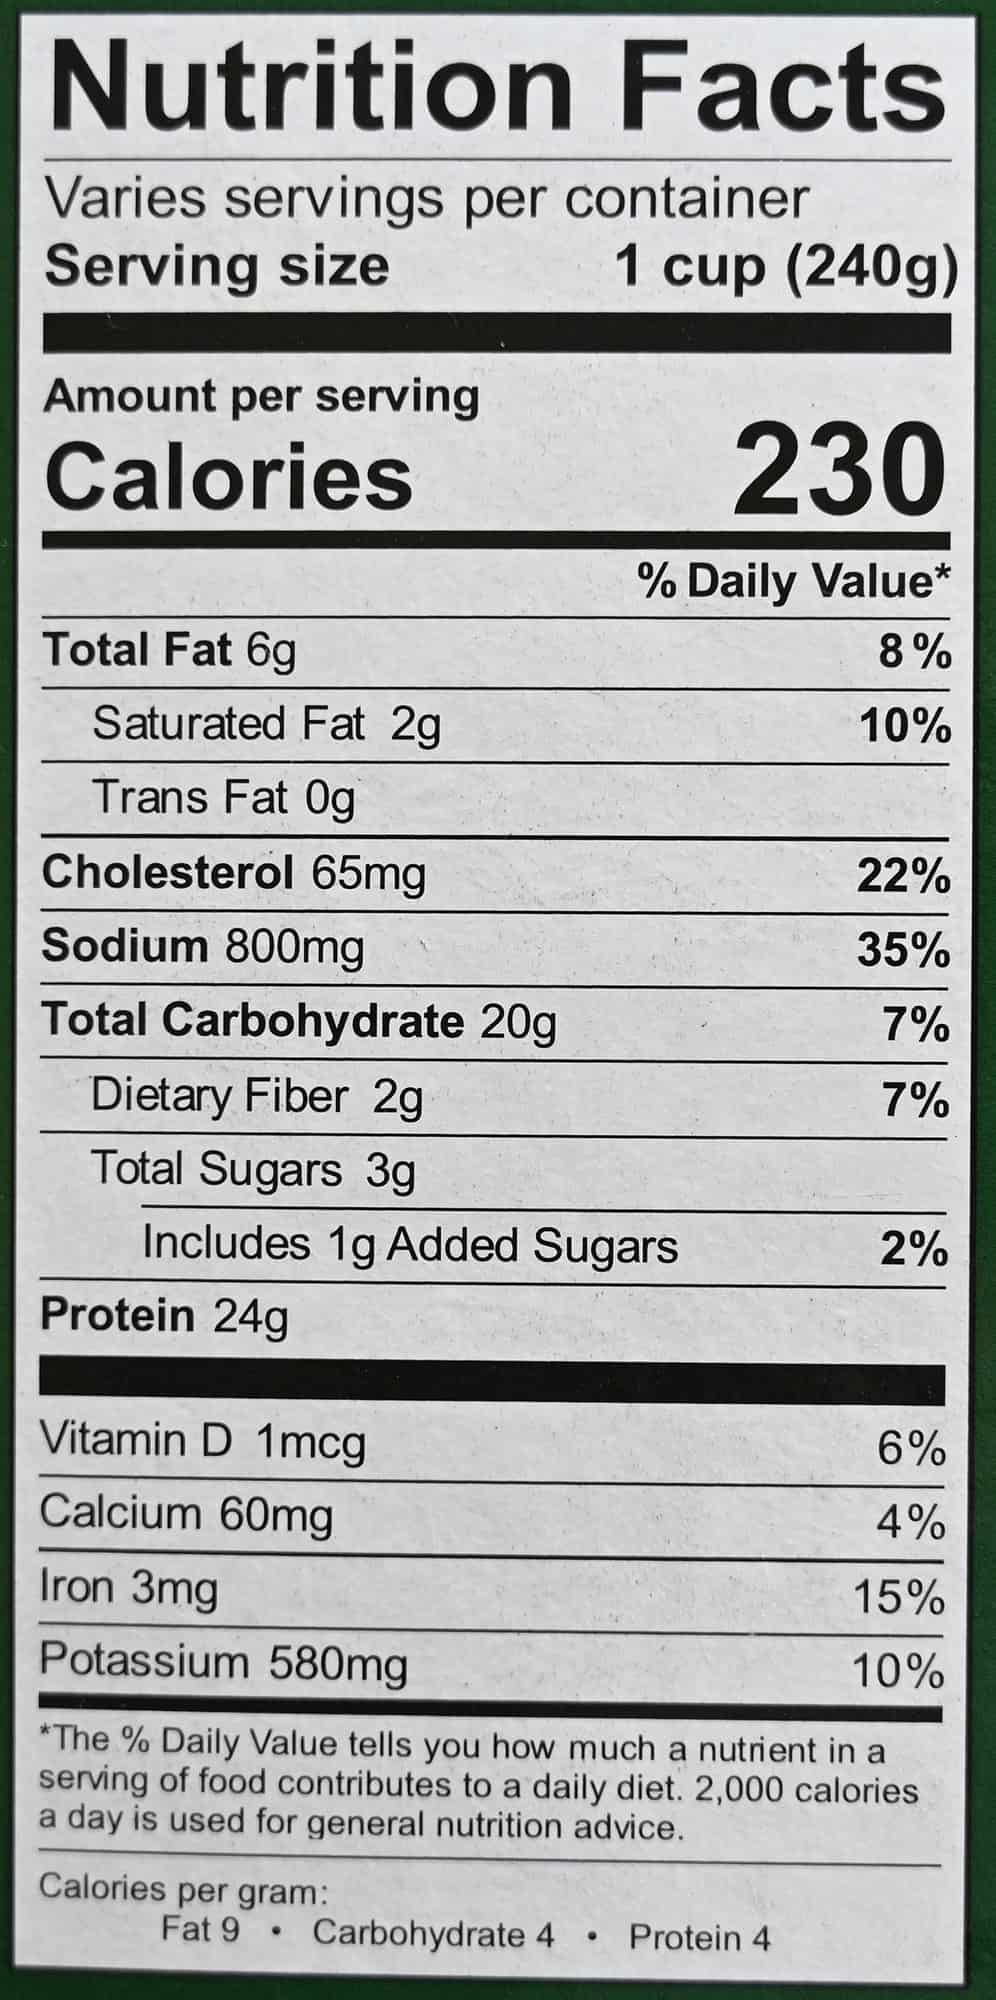 Image of the nutrition facts for the strew from the back of the box.